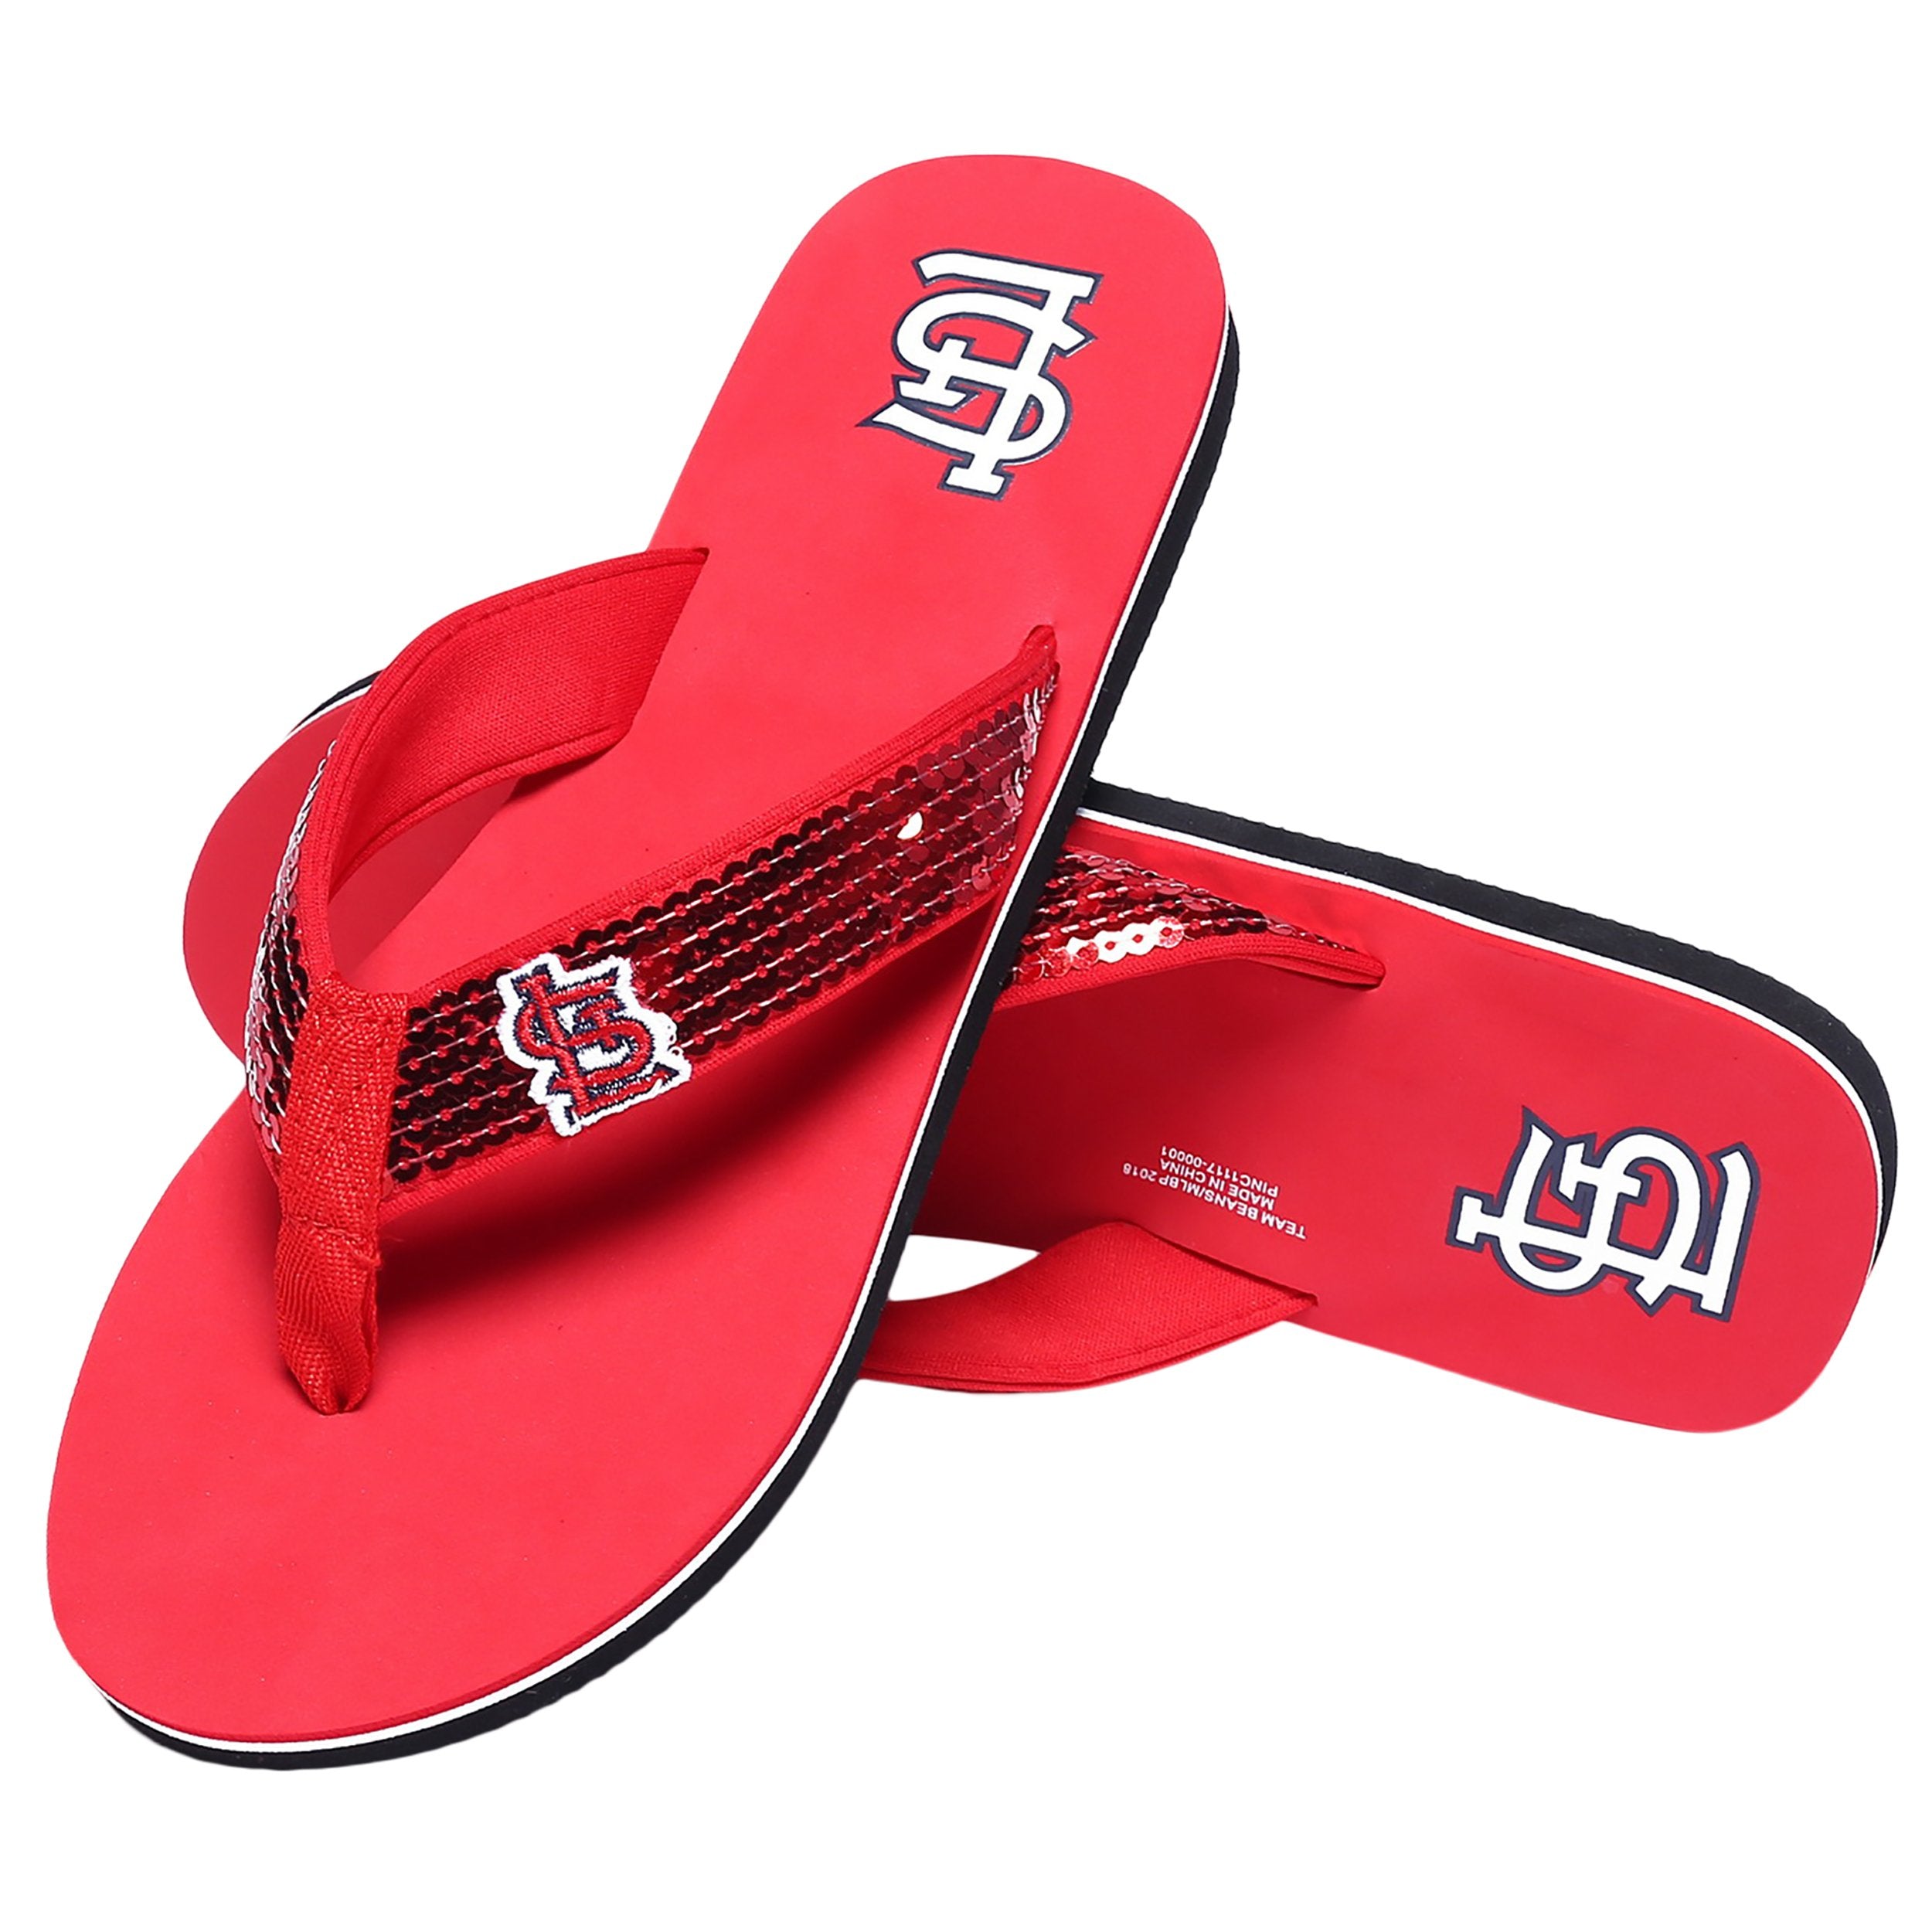 Official St. Louis Cardinals Slippers, Cardinals Bedroom Shoes